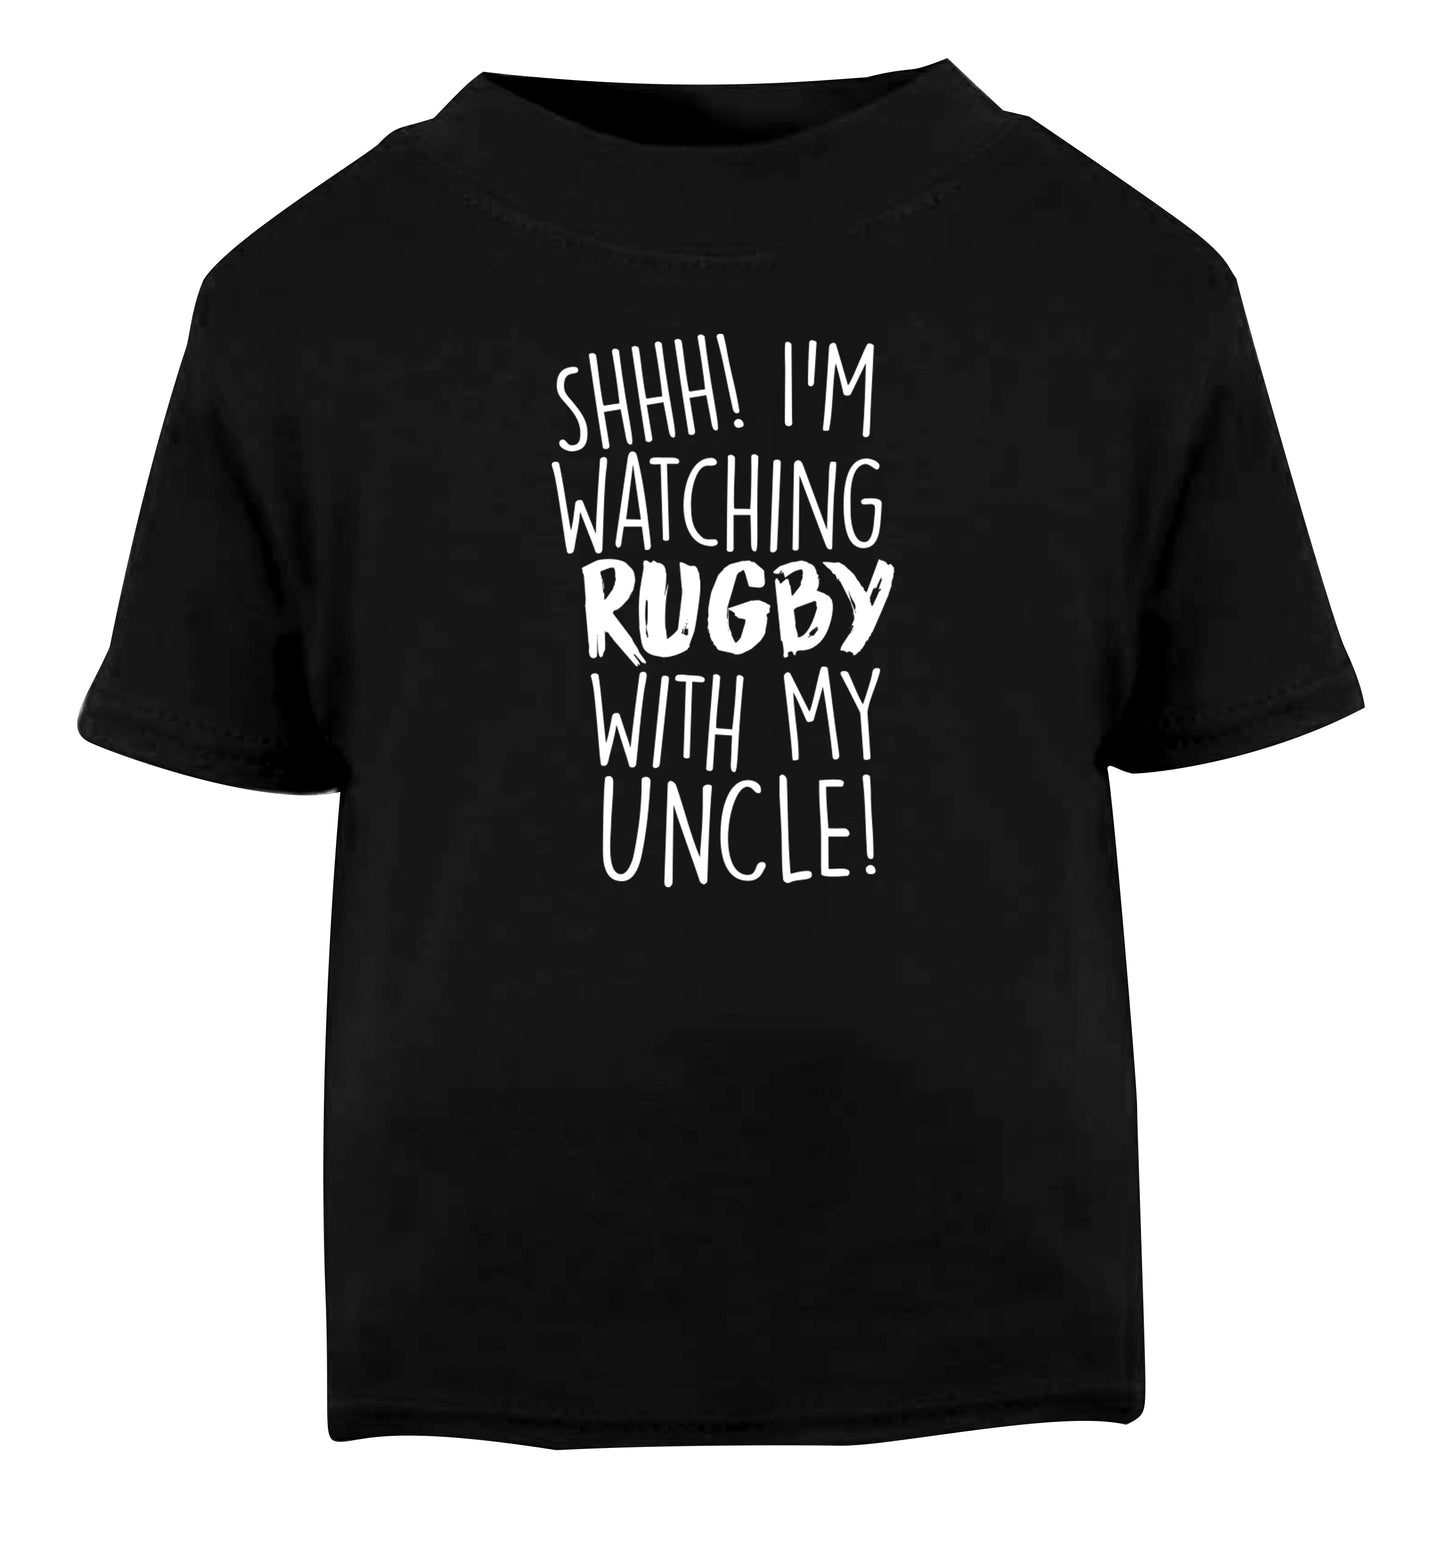 Shh.. I'm watching rugby with my uncle Black Baby Toddler Tshirt 2 years